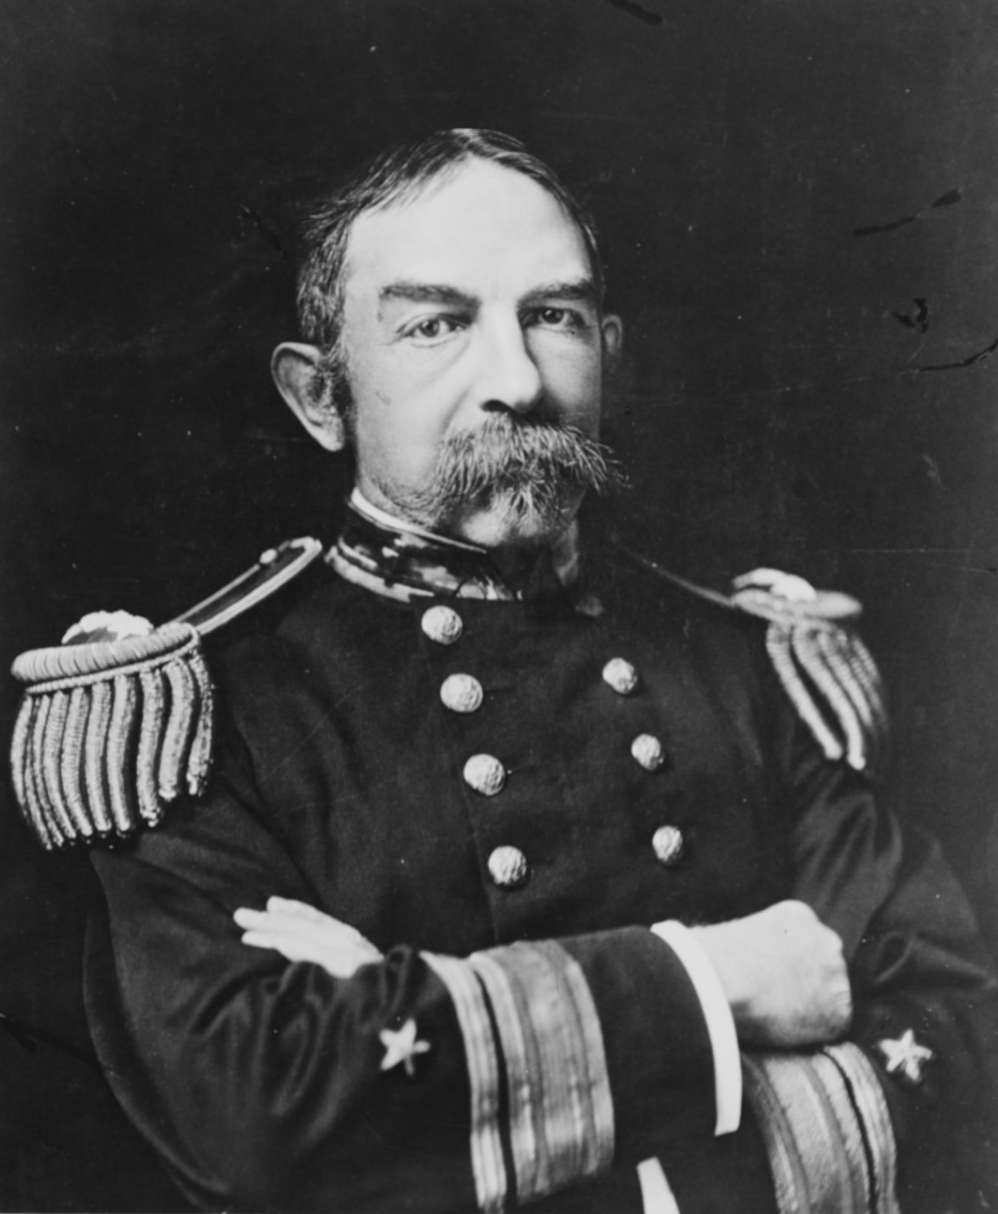 A picture of Capt. Arent S. Crowninshield who was a member of the Naval War Board.